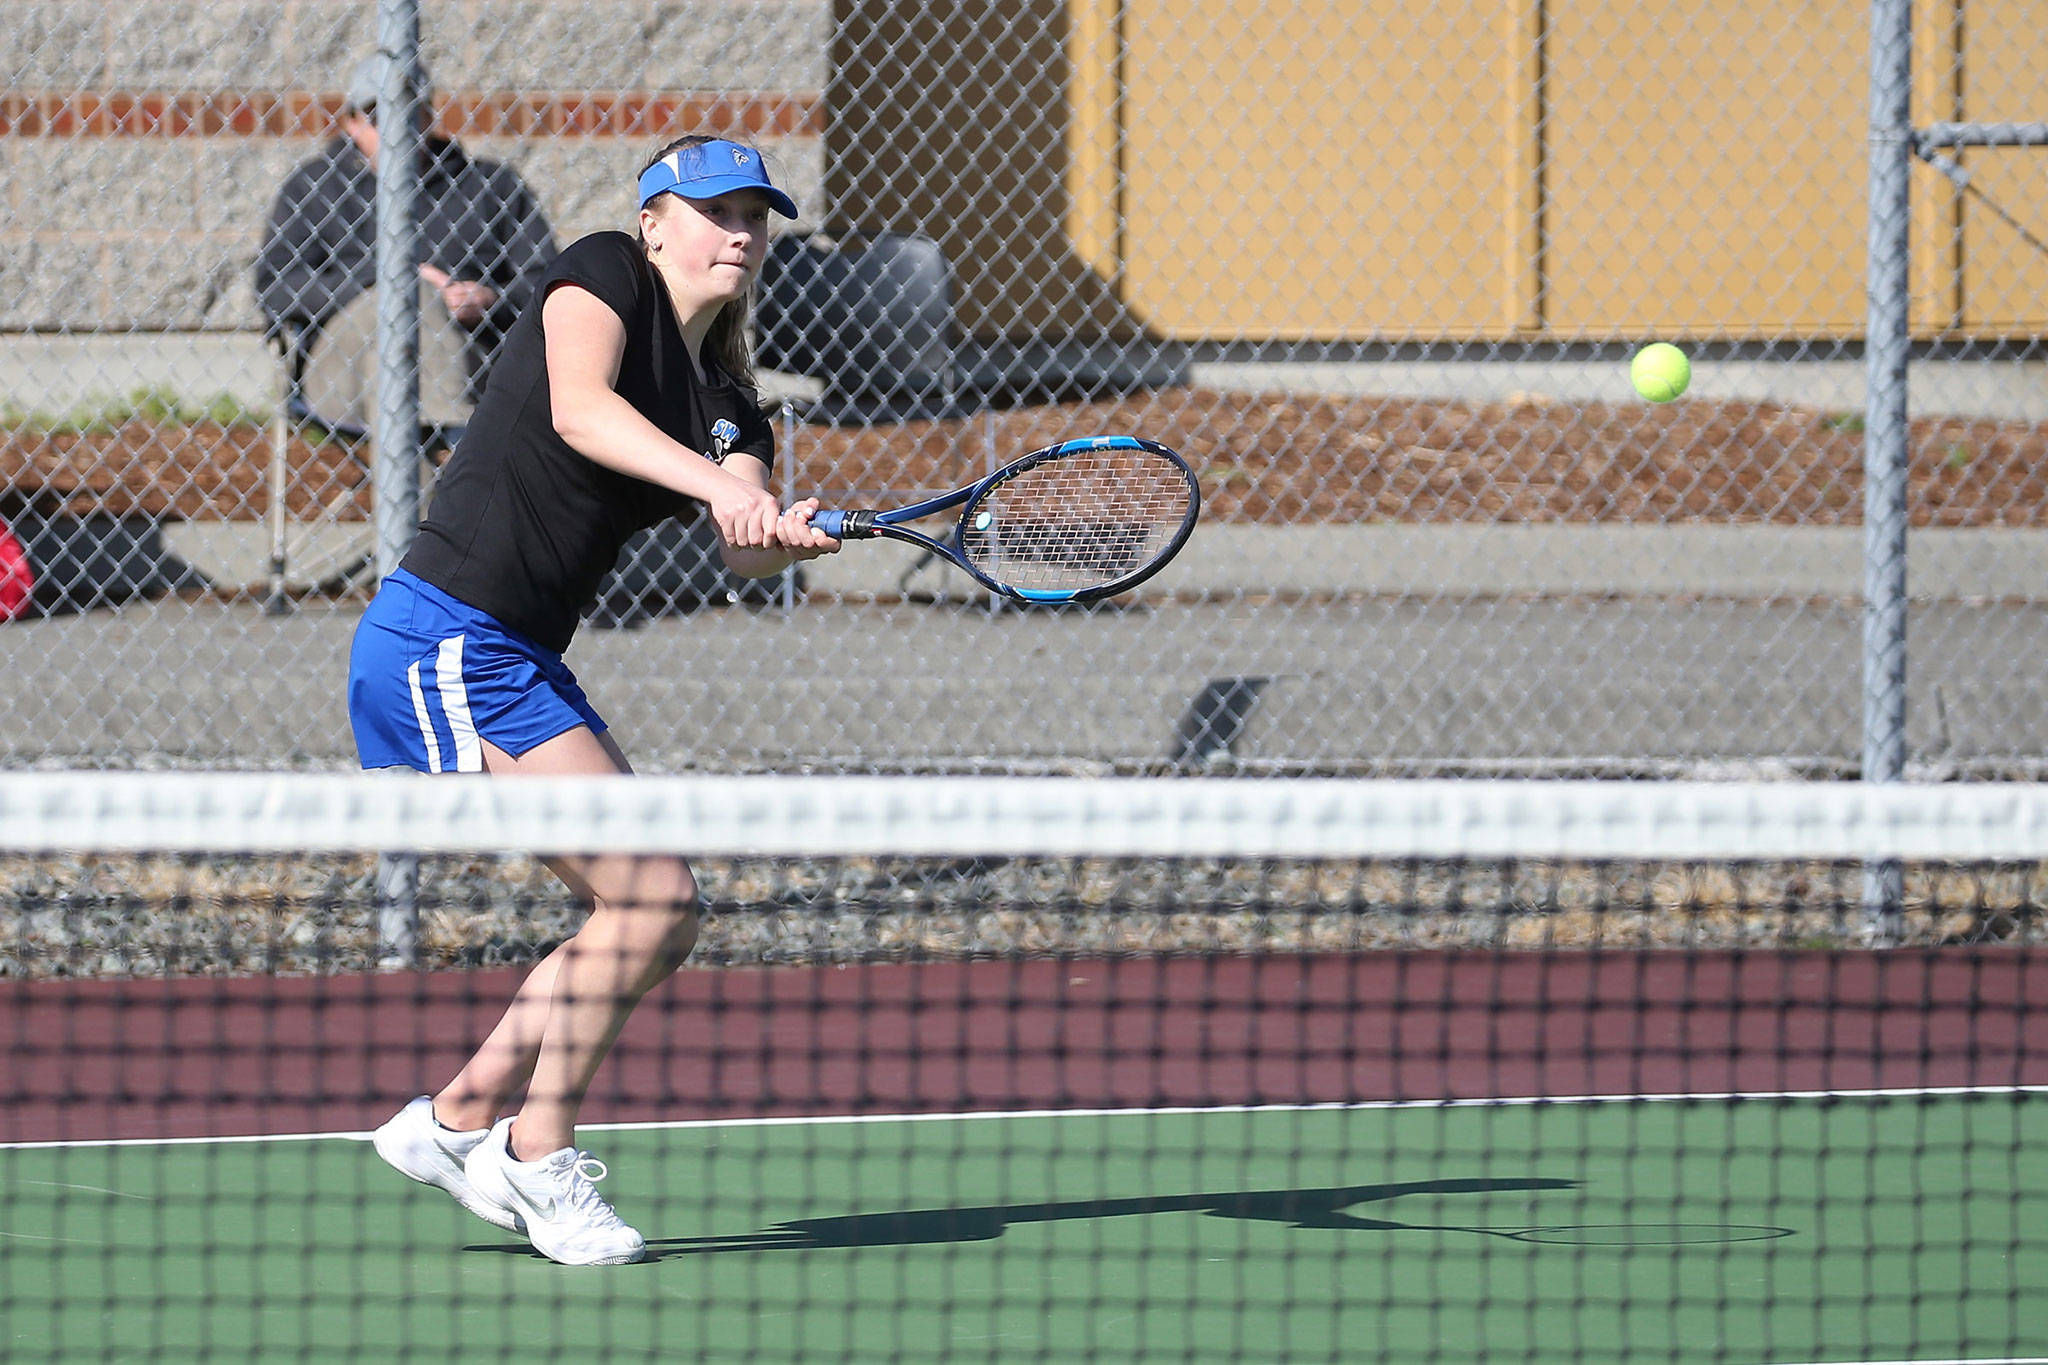 Mary Zisette, shown here in a match at Coupeville earlier this season, won the North Sound Conference/District 1 doubles title with partner Alison Papritz this week. (Photo by John Fisken)